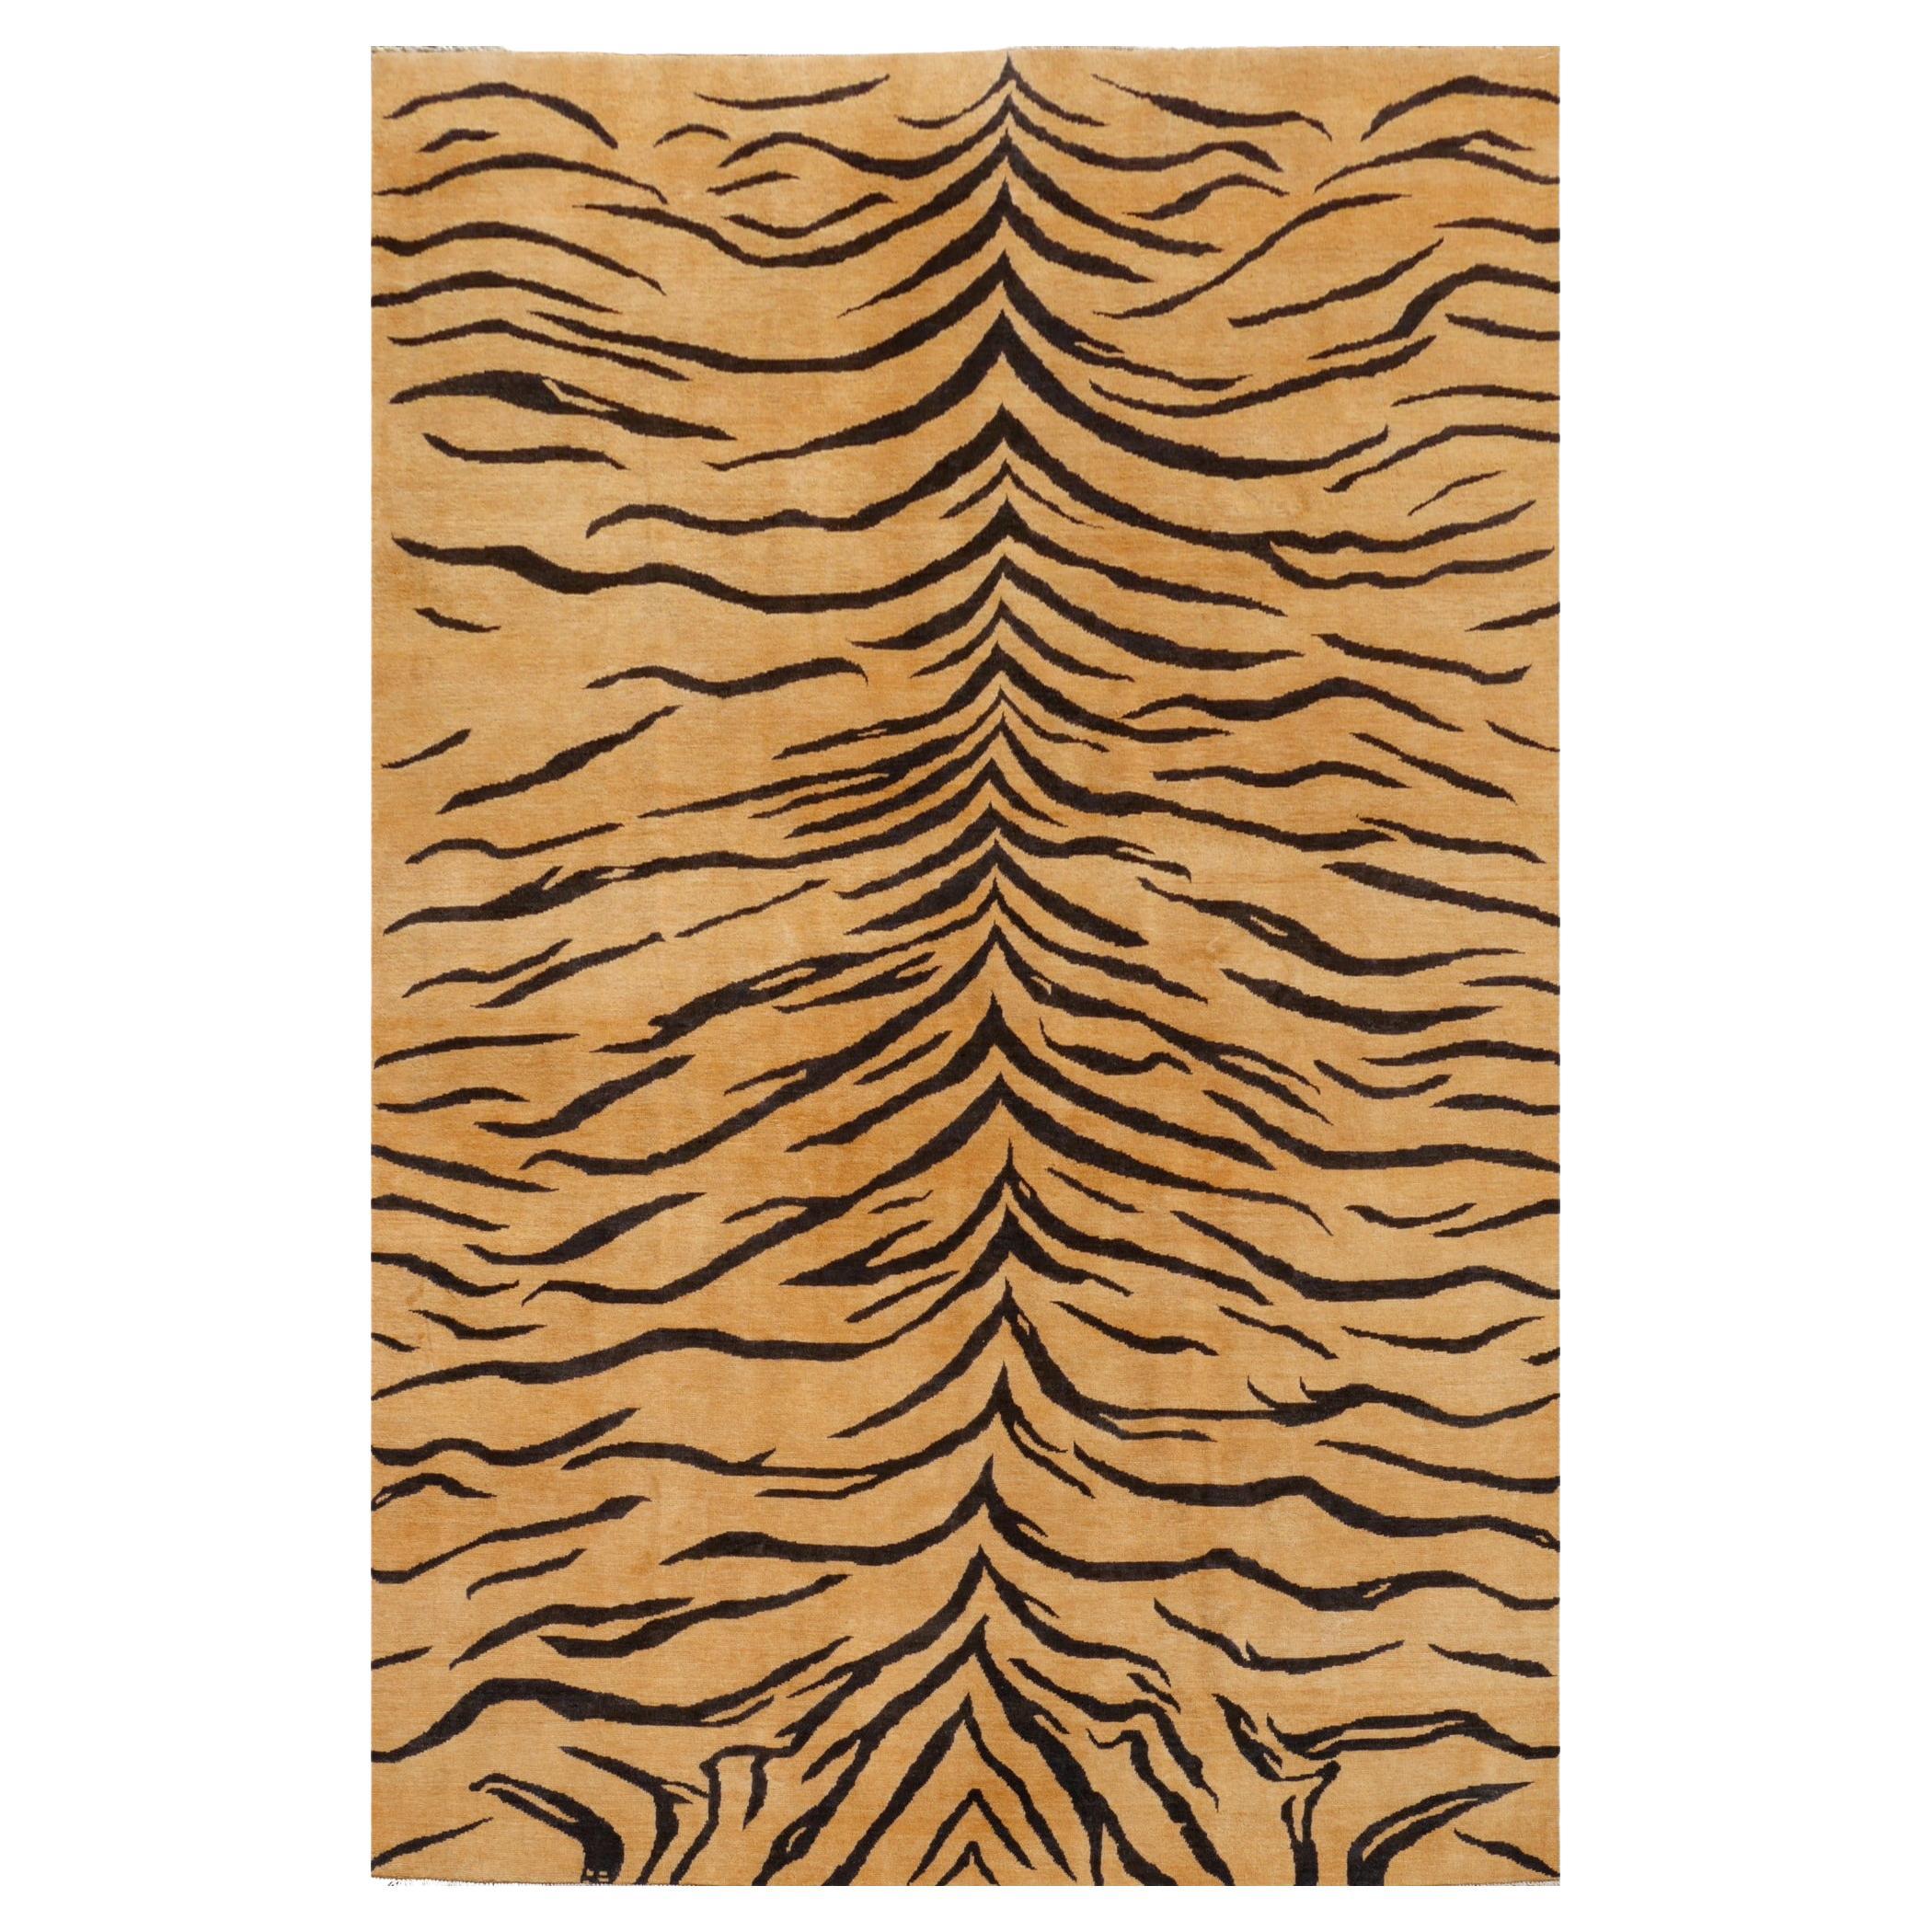 Large Tiger Rug Wool Hand Knotted Art Deco Design by Djoharian Collection